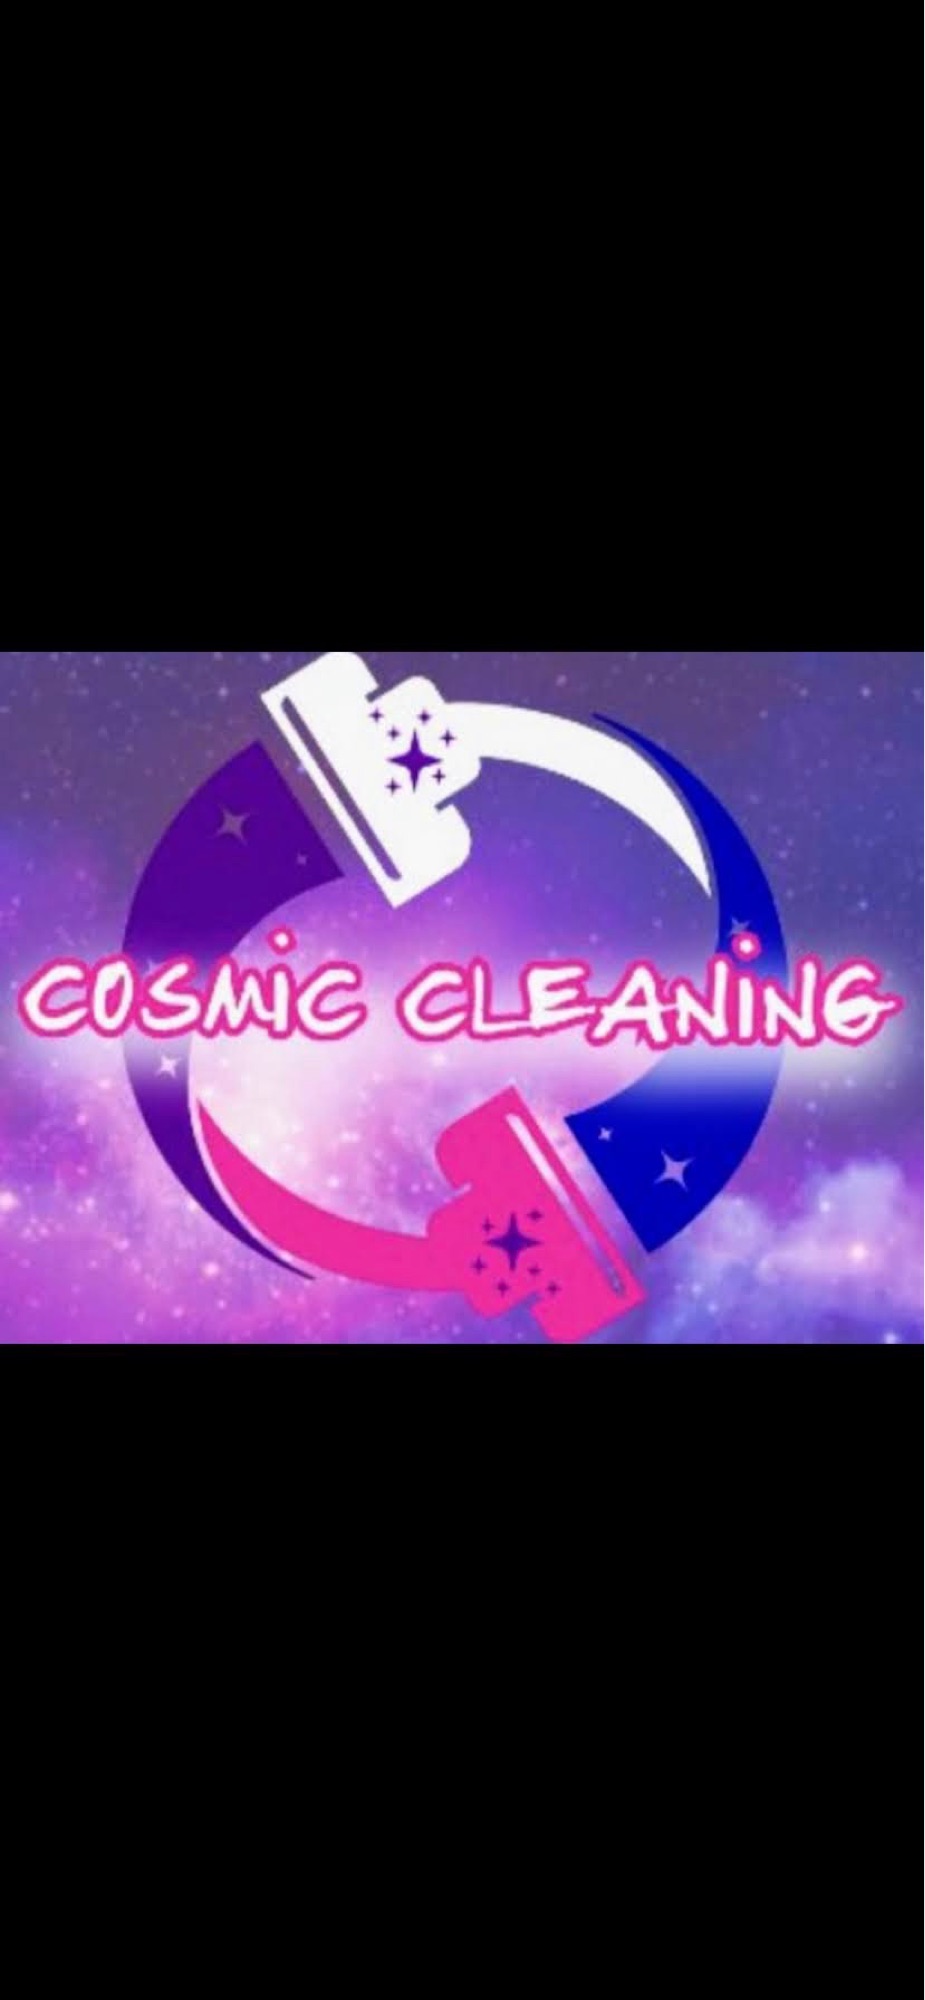 Cosmic Cleaning Logo